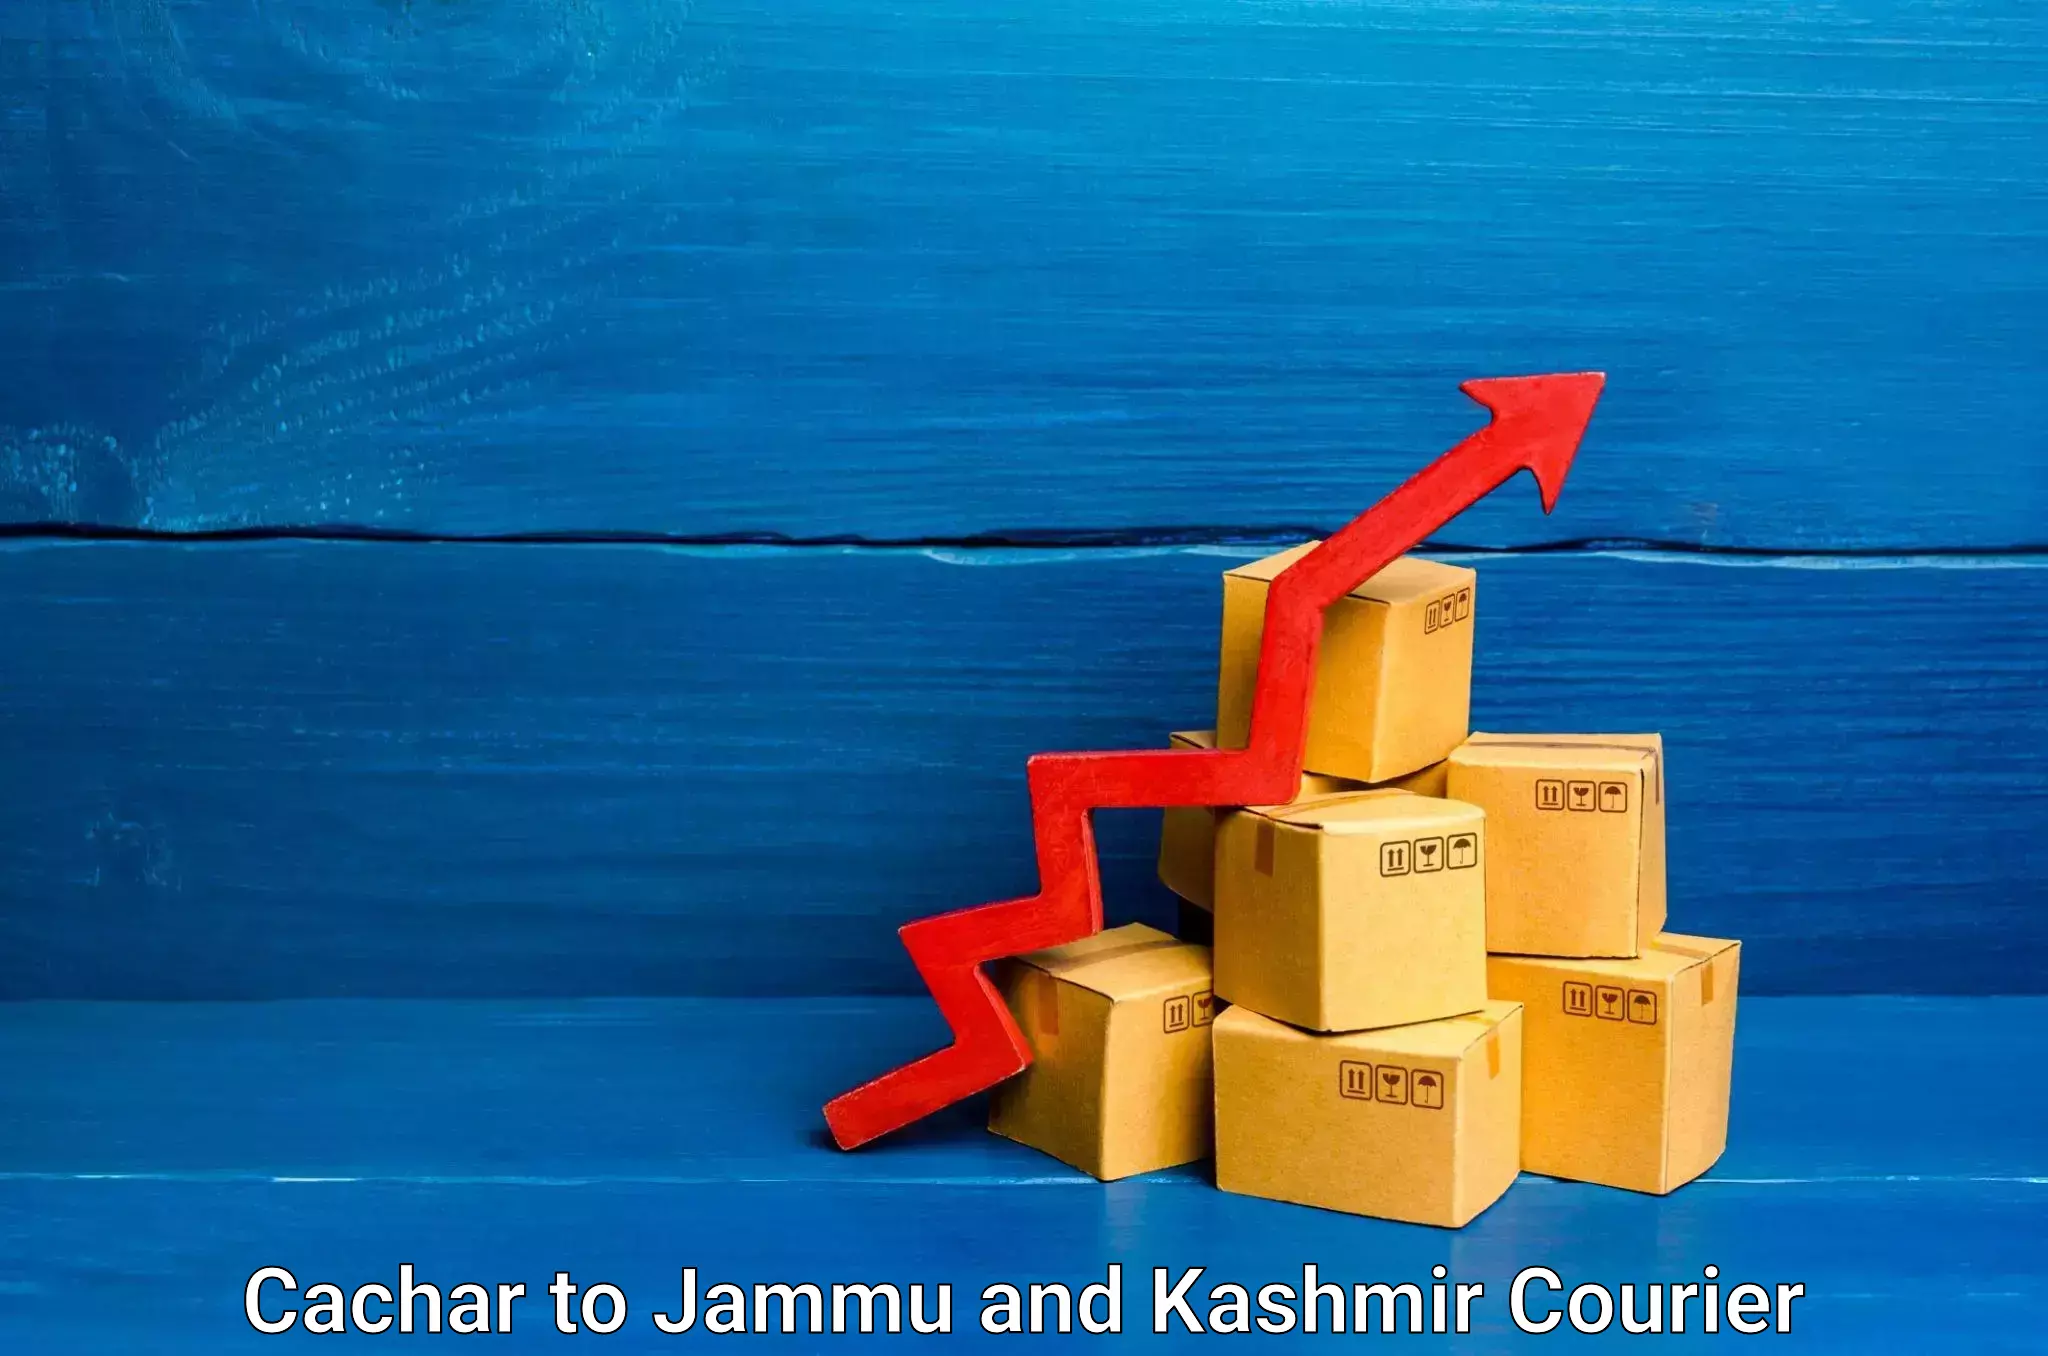 Courier service efficiency Cachar to Jammu and Kashmir